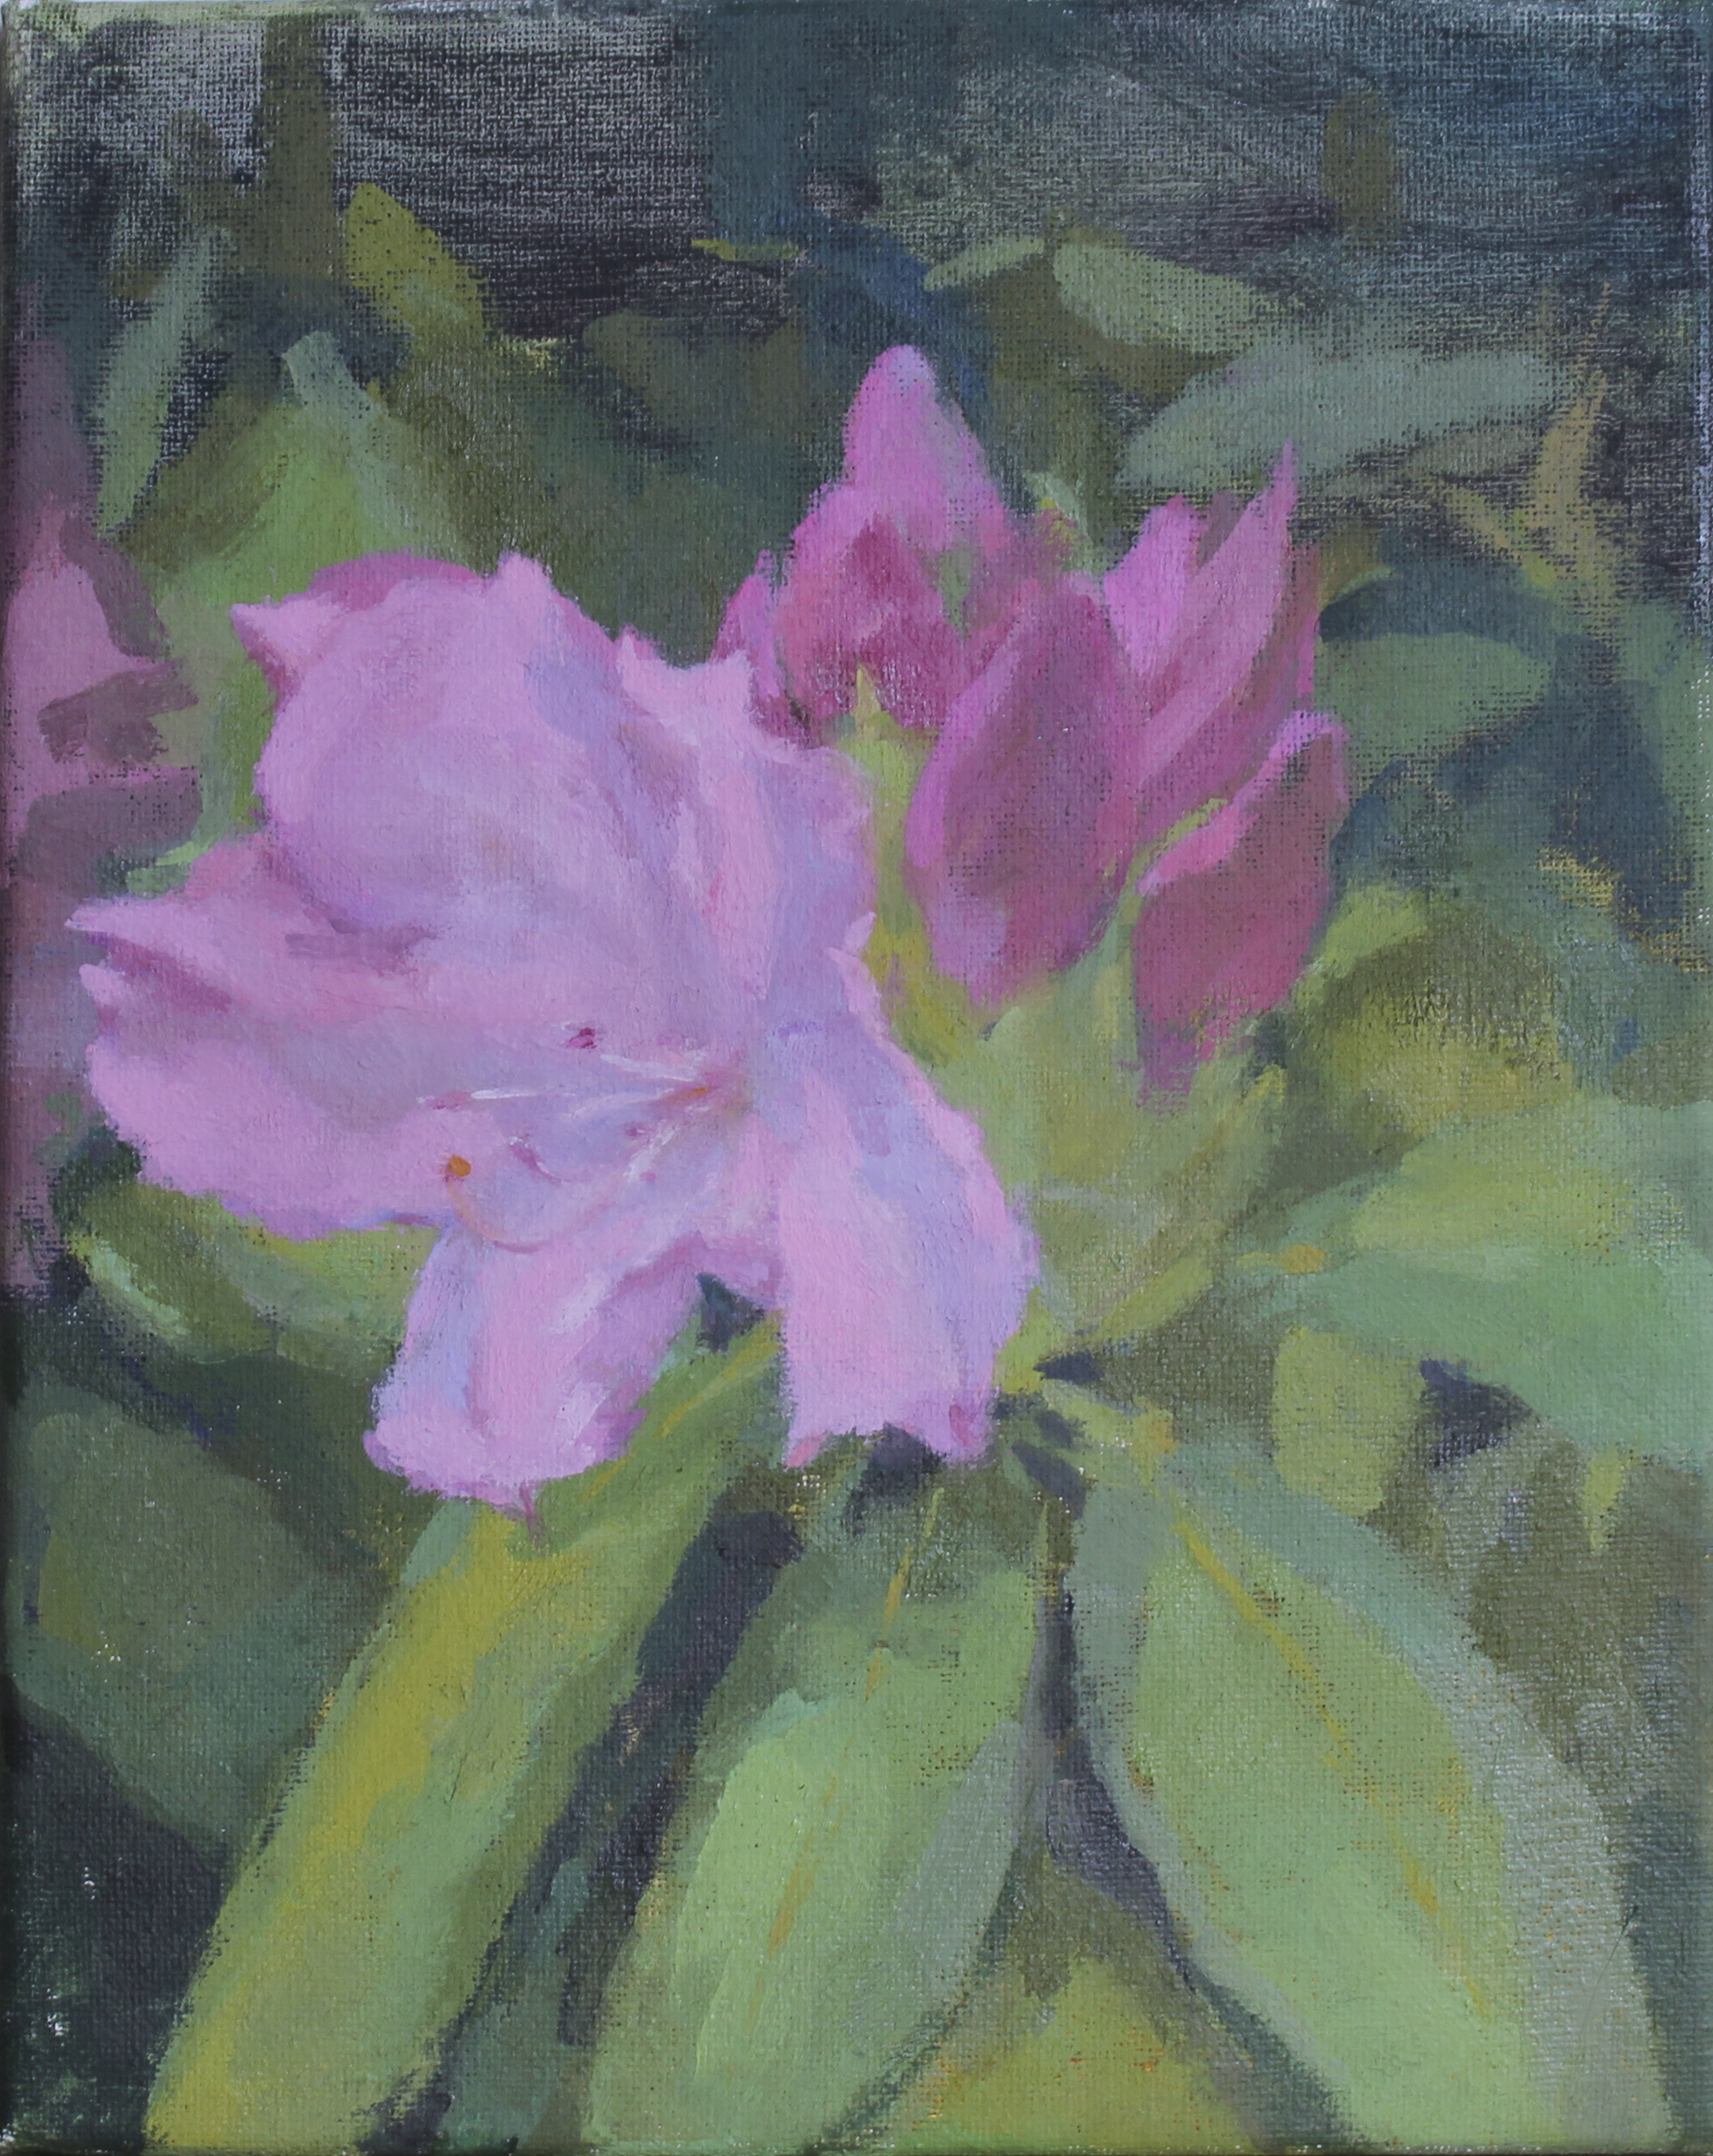    pink rhododendrons     oil on canvas 8x10” 2018  private collection Pennsylvania 